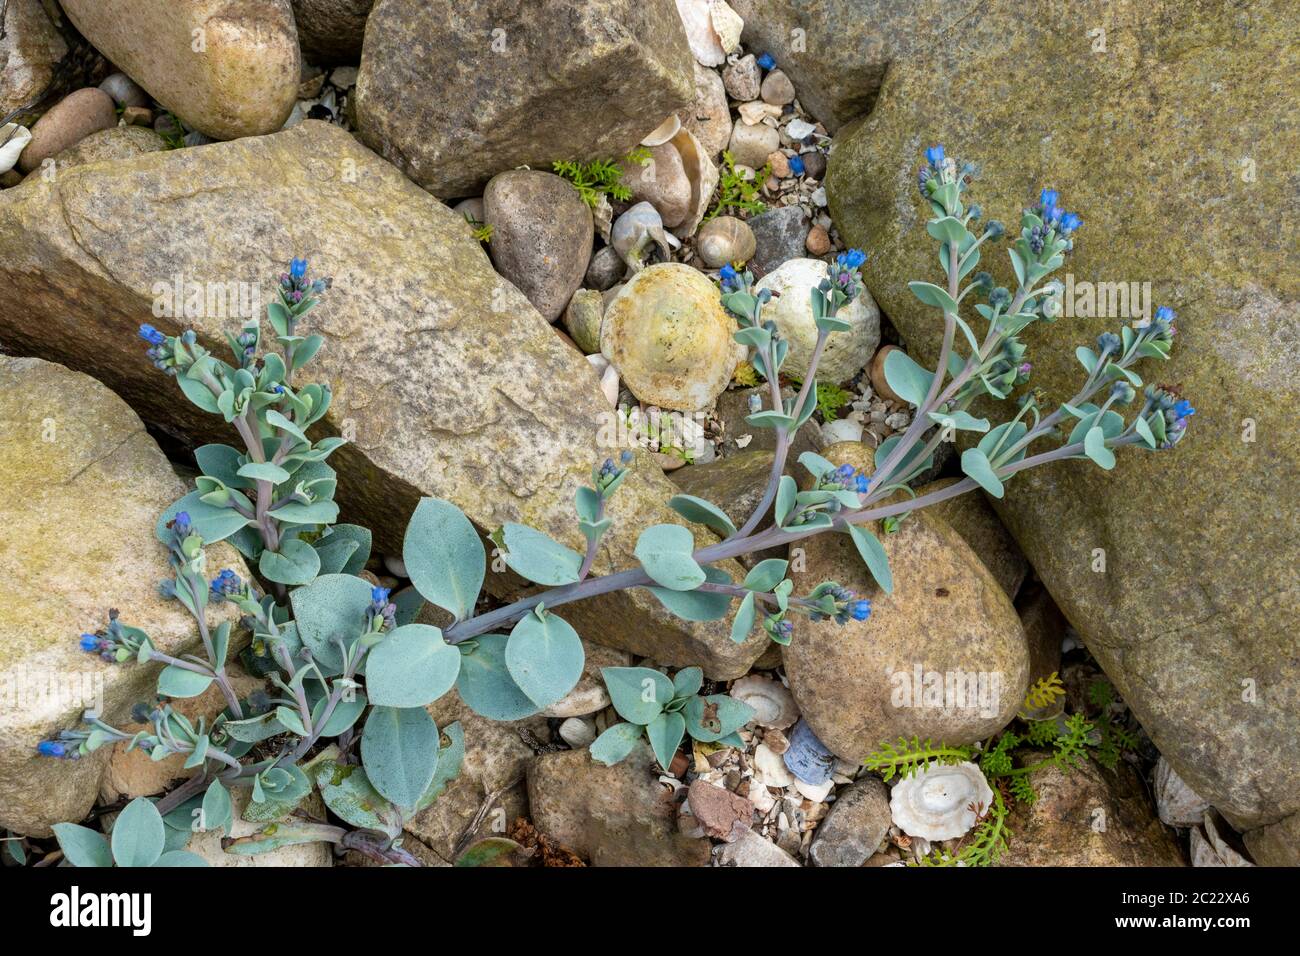 OYSTERPLANT Mertensia maritima THE STEM OF A  BLUE GREEN PLANT WITH BRIGHT BLUE FLOWERS ON A SEASHELL AND ROCK BEACH MORAY COAST SCOTLAND Stock Photo